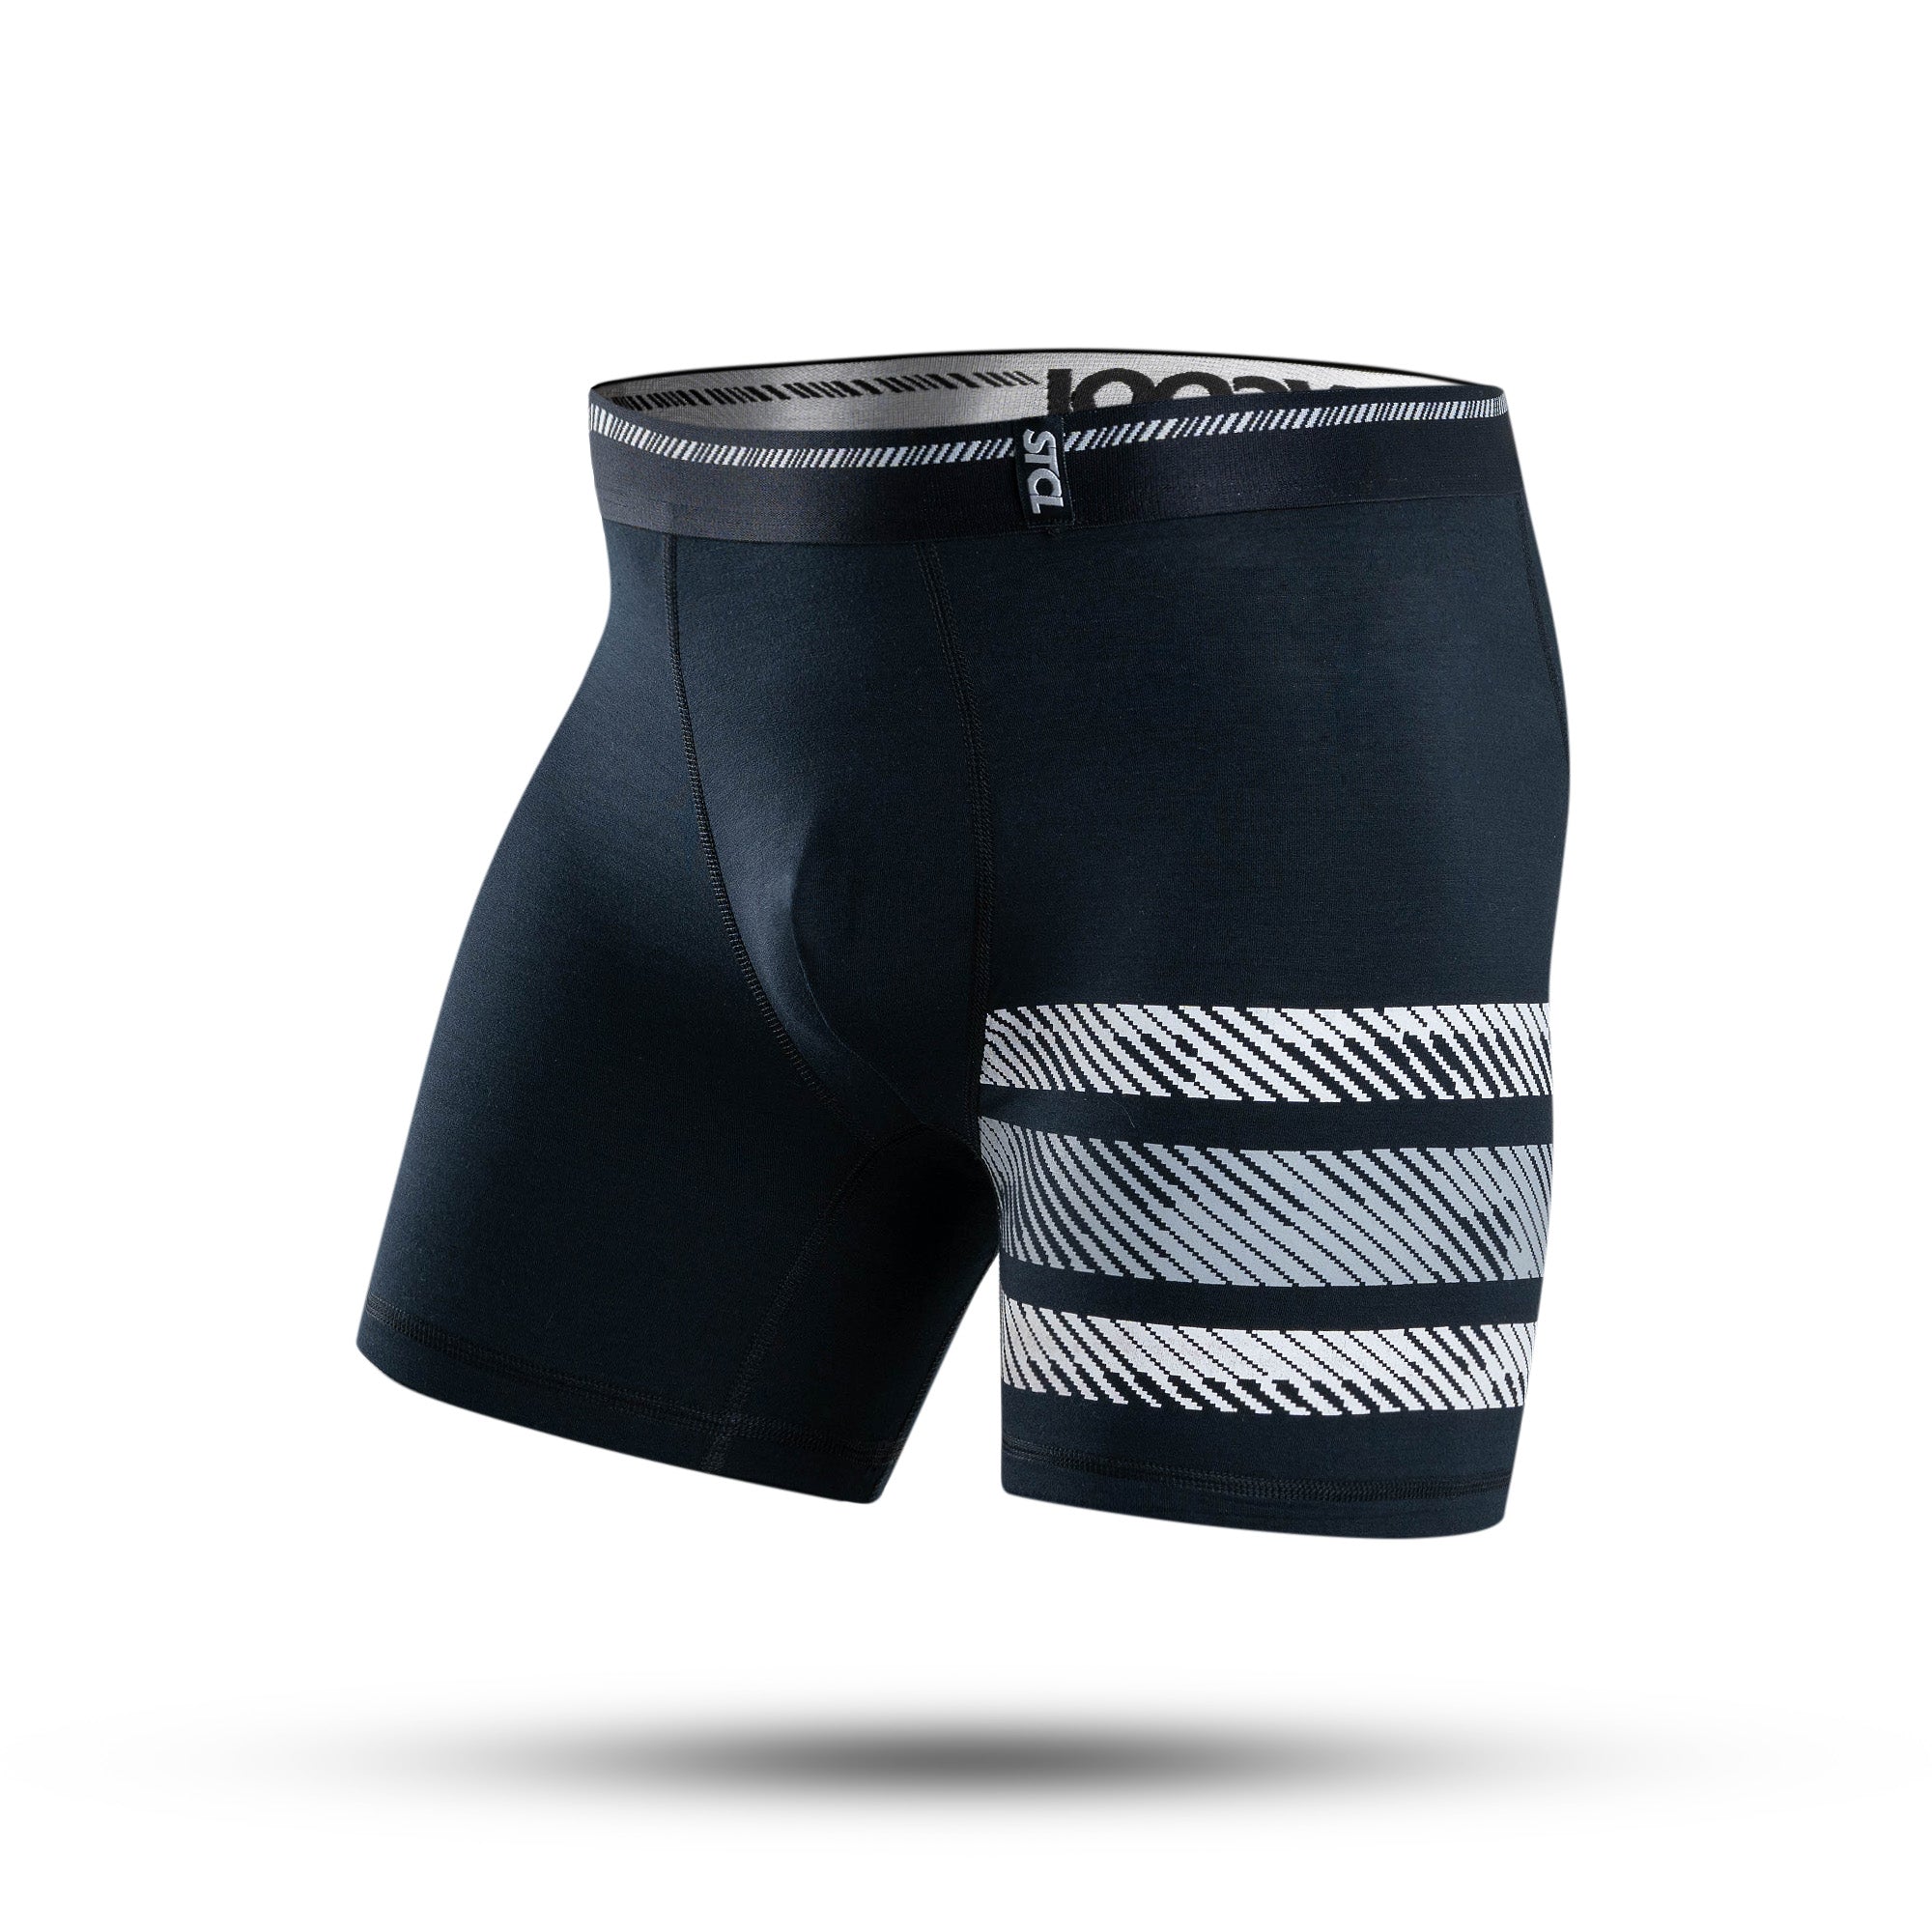 BOXER BRIEF 5" ULTRA SOFT - OLDSKULL WOODCUT